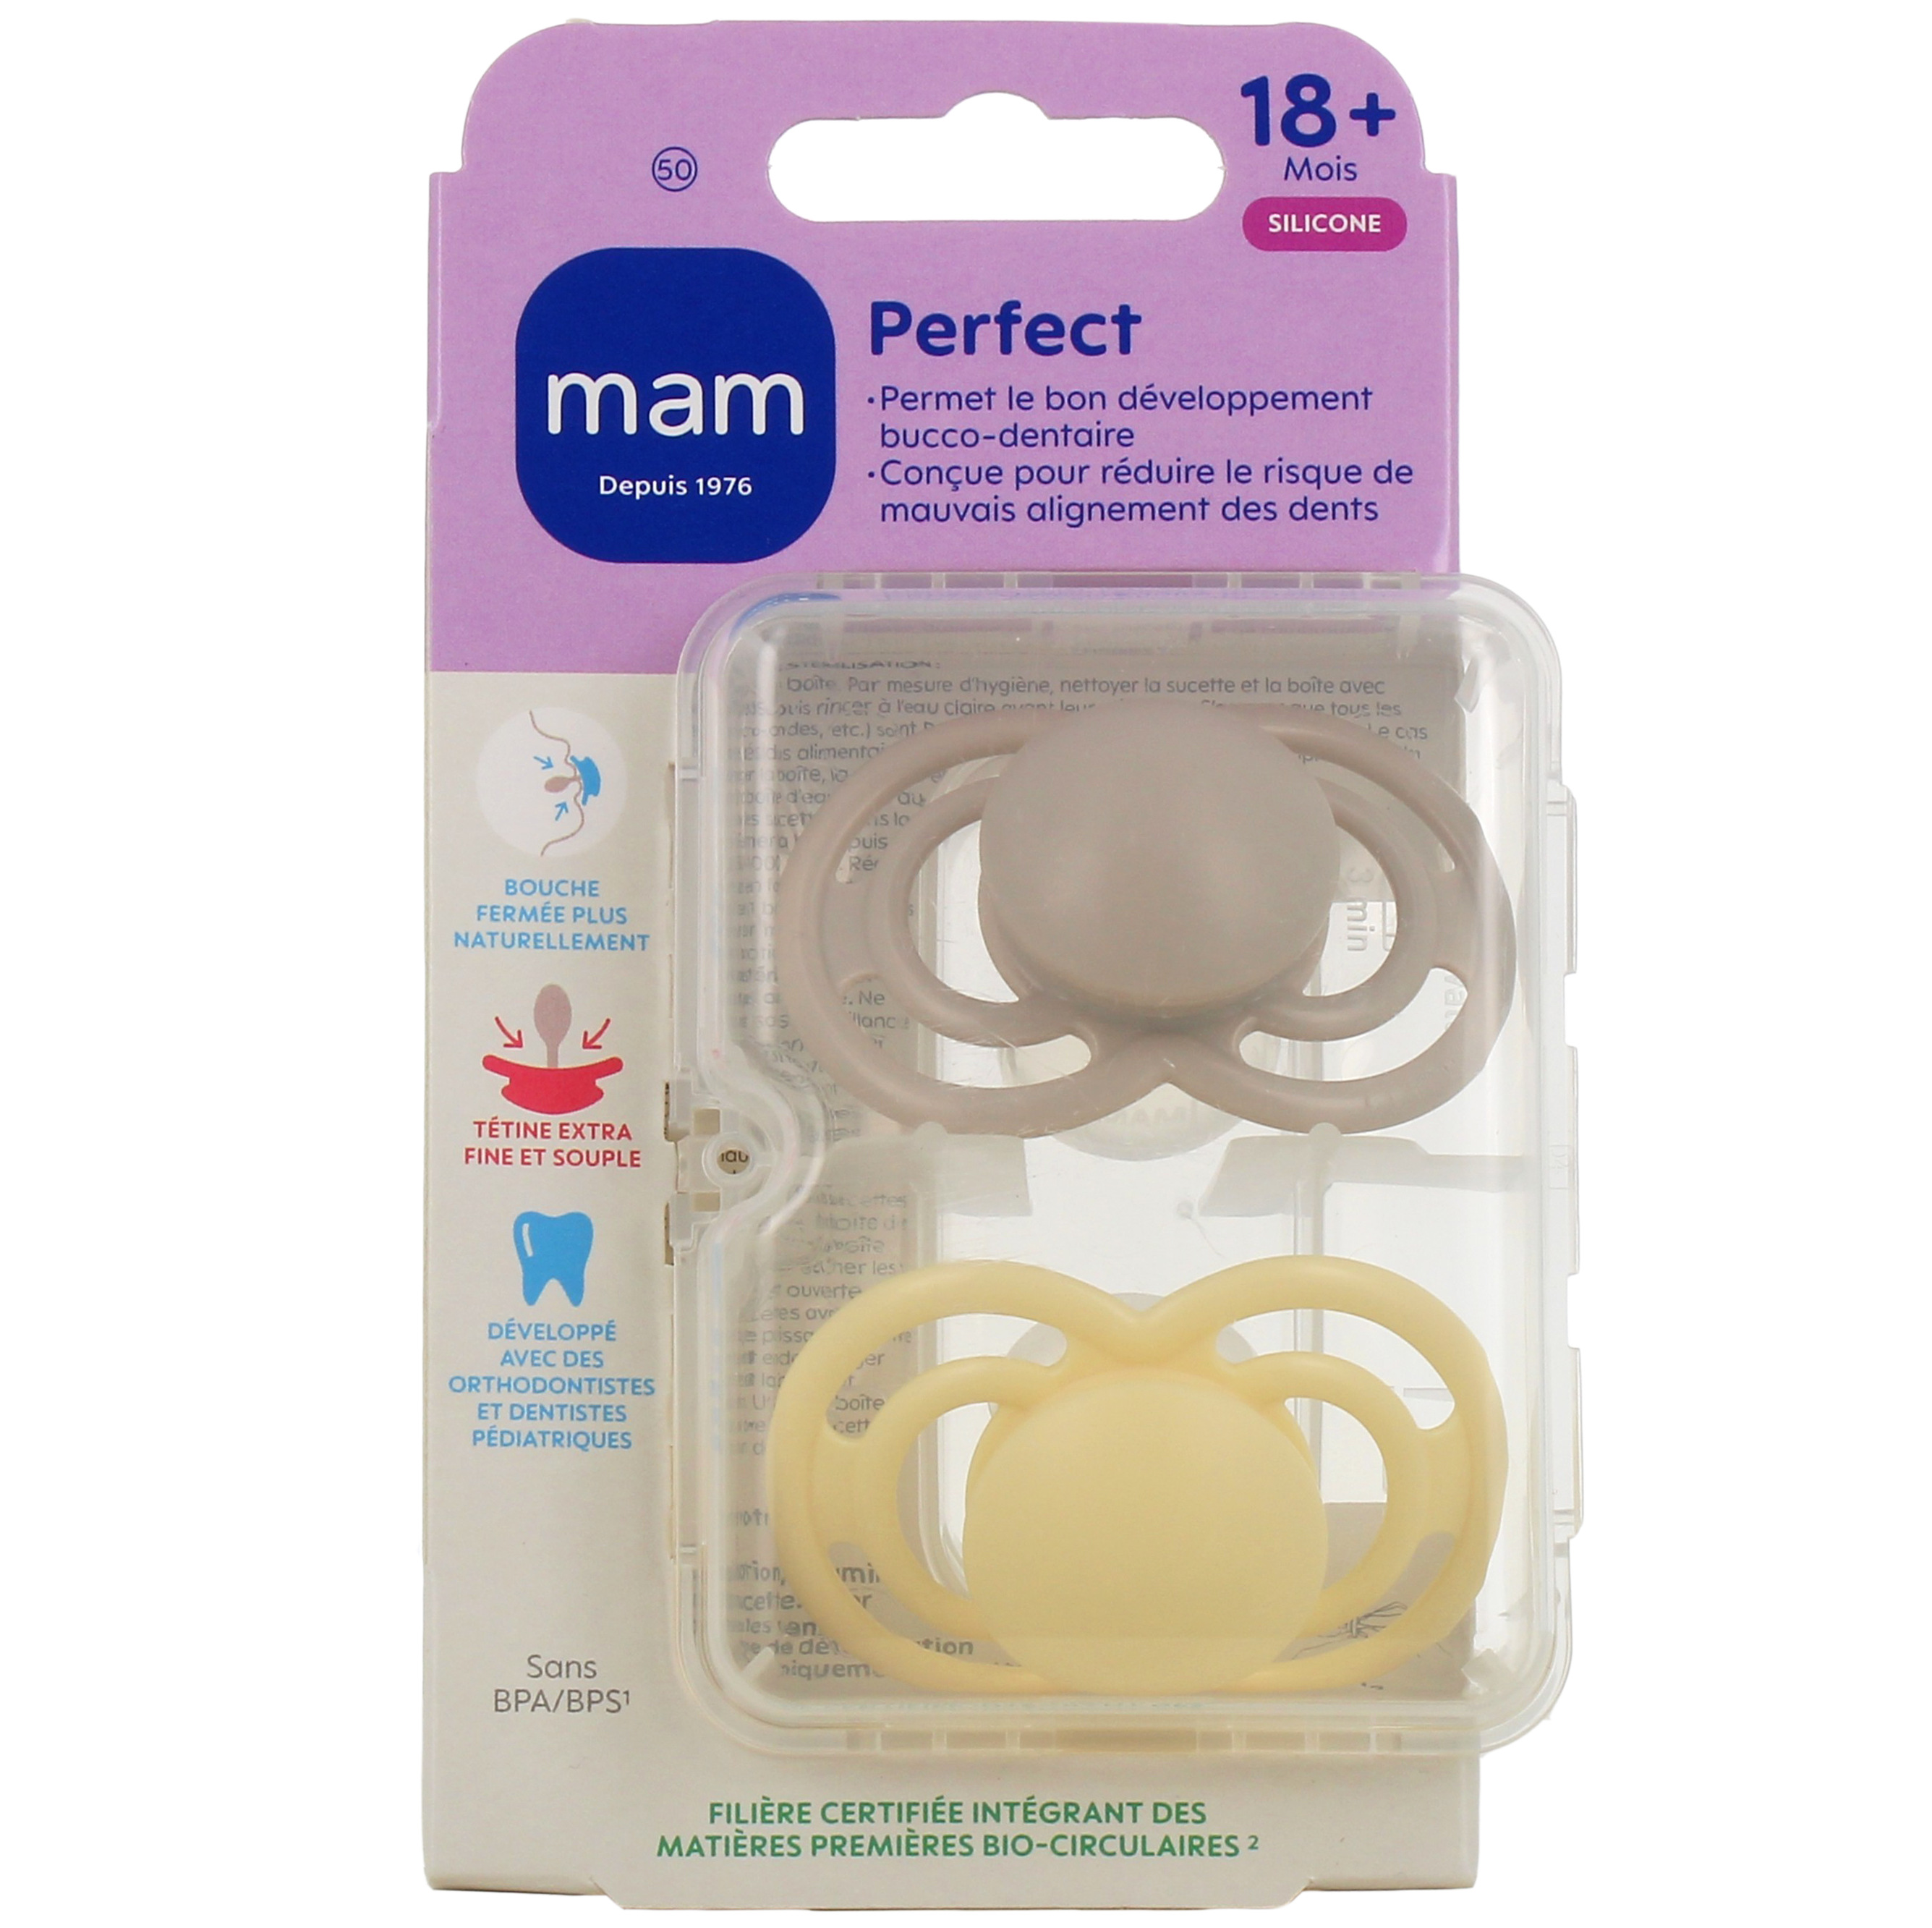 MAM Duo sucettes +18 mois anatomiques nuit silicone REF 40